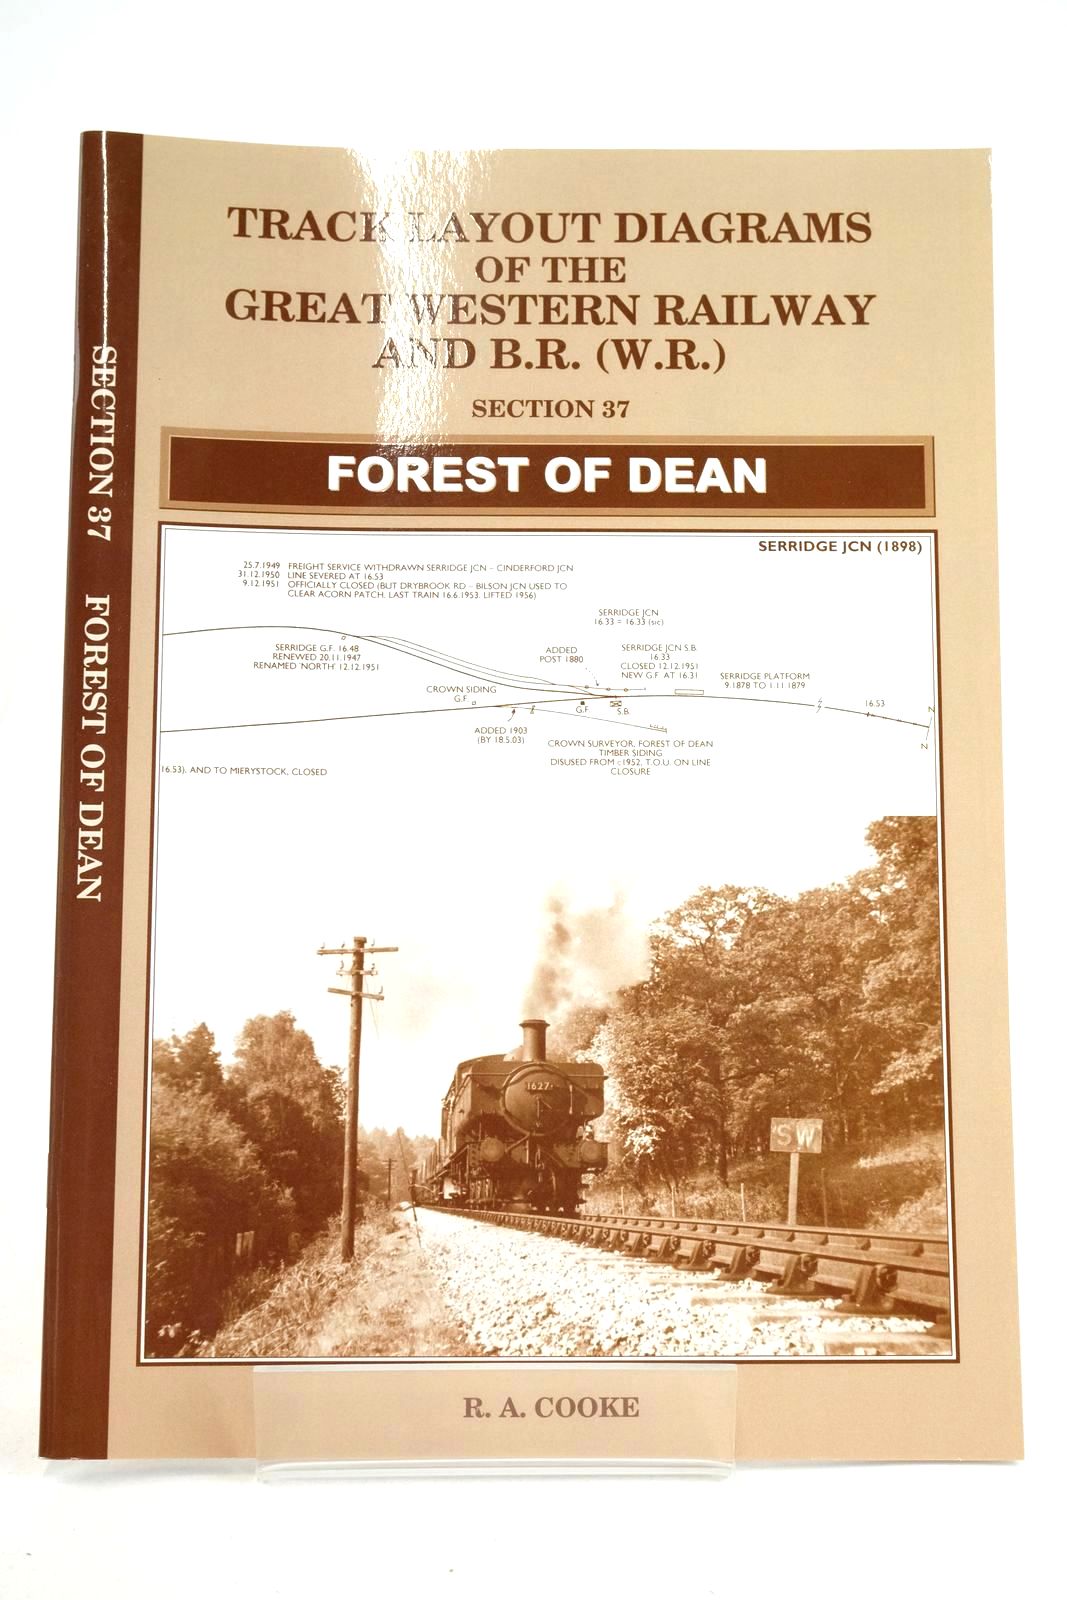 Photo of TRACK LAYOUT DIAGRAMS OF THE G.W.R. AND BR W.R. SECTION 37 FOREST OF DEAN written by Cooke, R.A. published by R.A. Cooke (STOCK CODE: 1327853)  for sale by Stella & Rose's Books